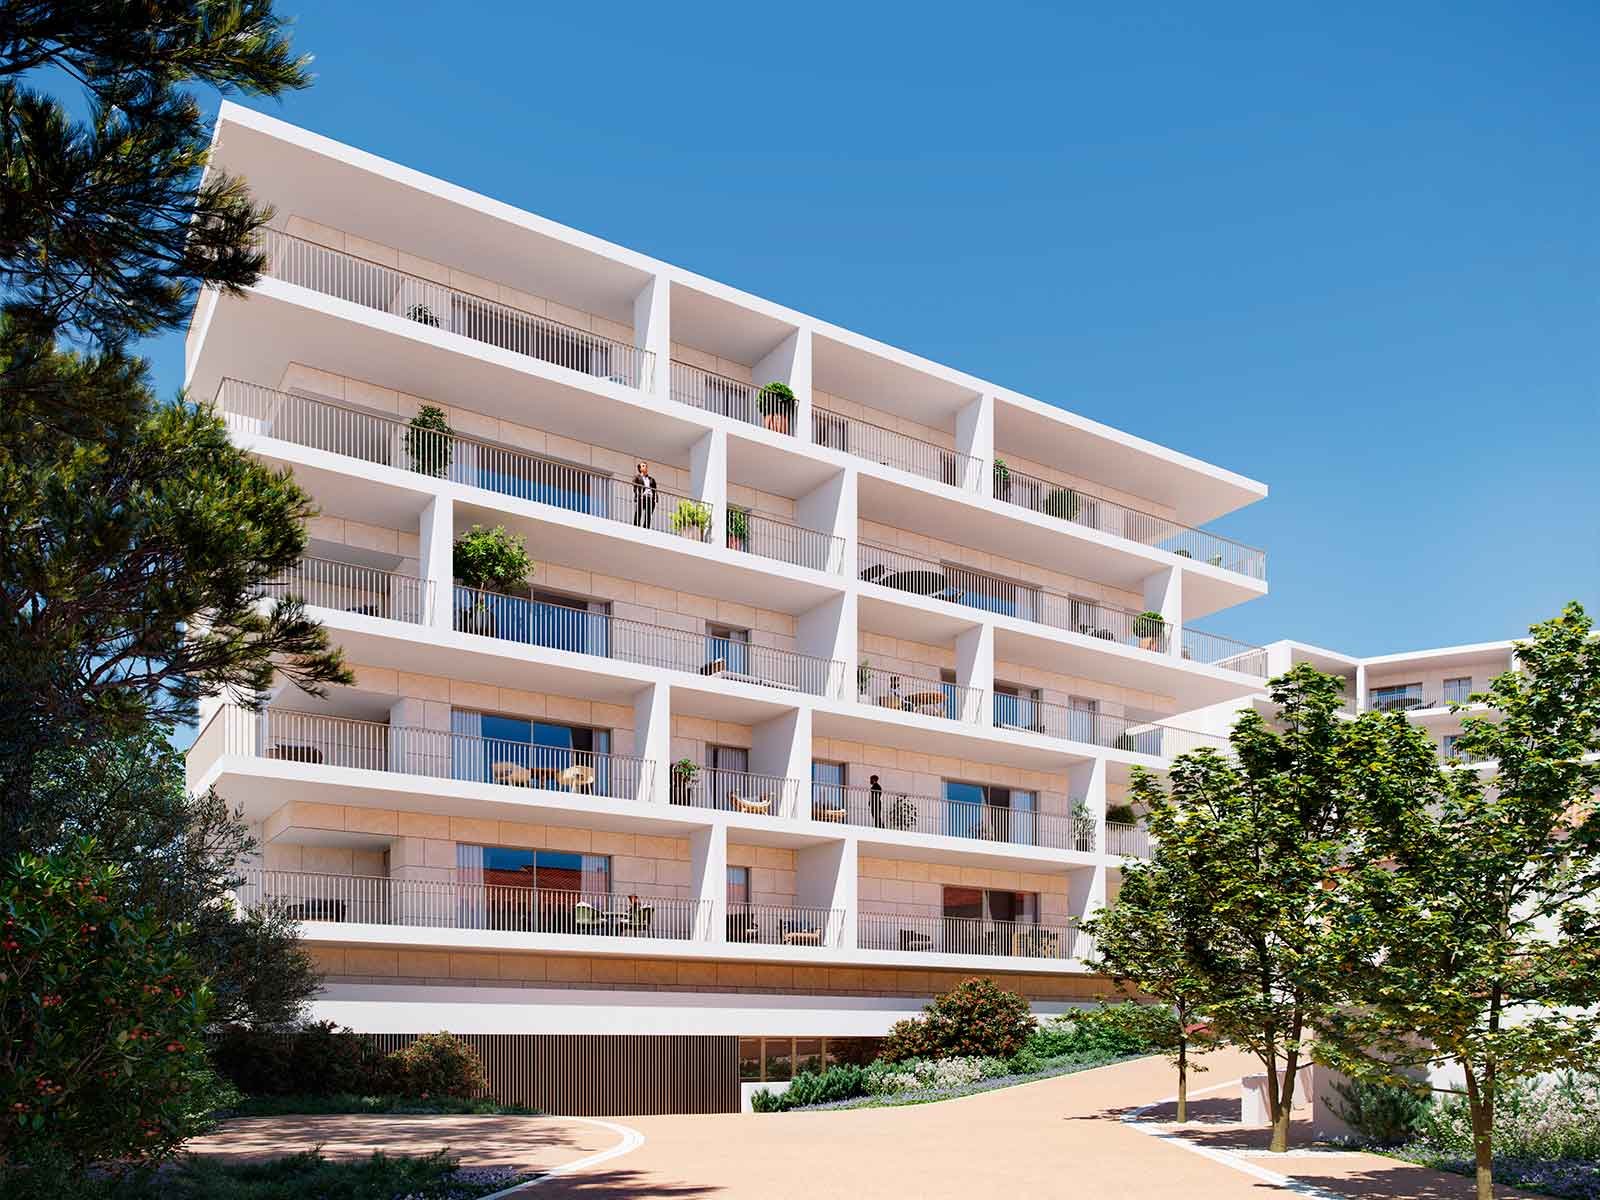 3 bedroom apartment with balcony and parking in new development, Lisbon 1530168308